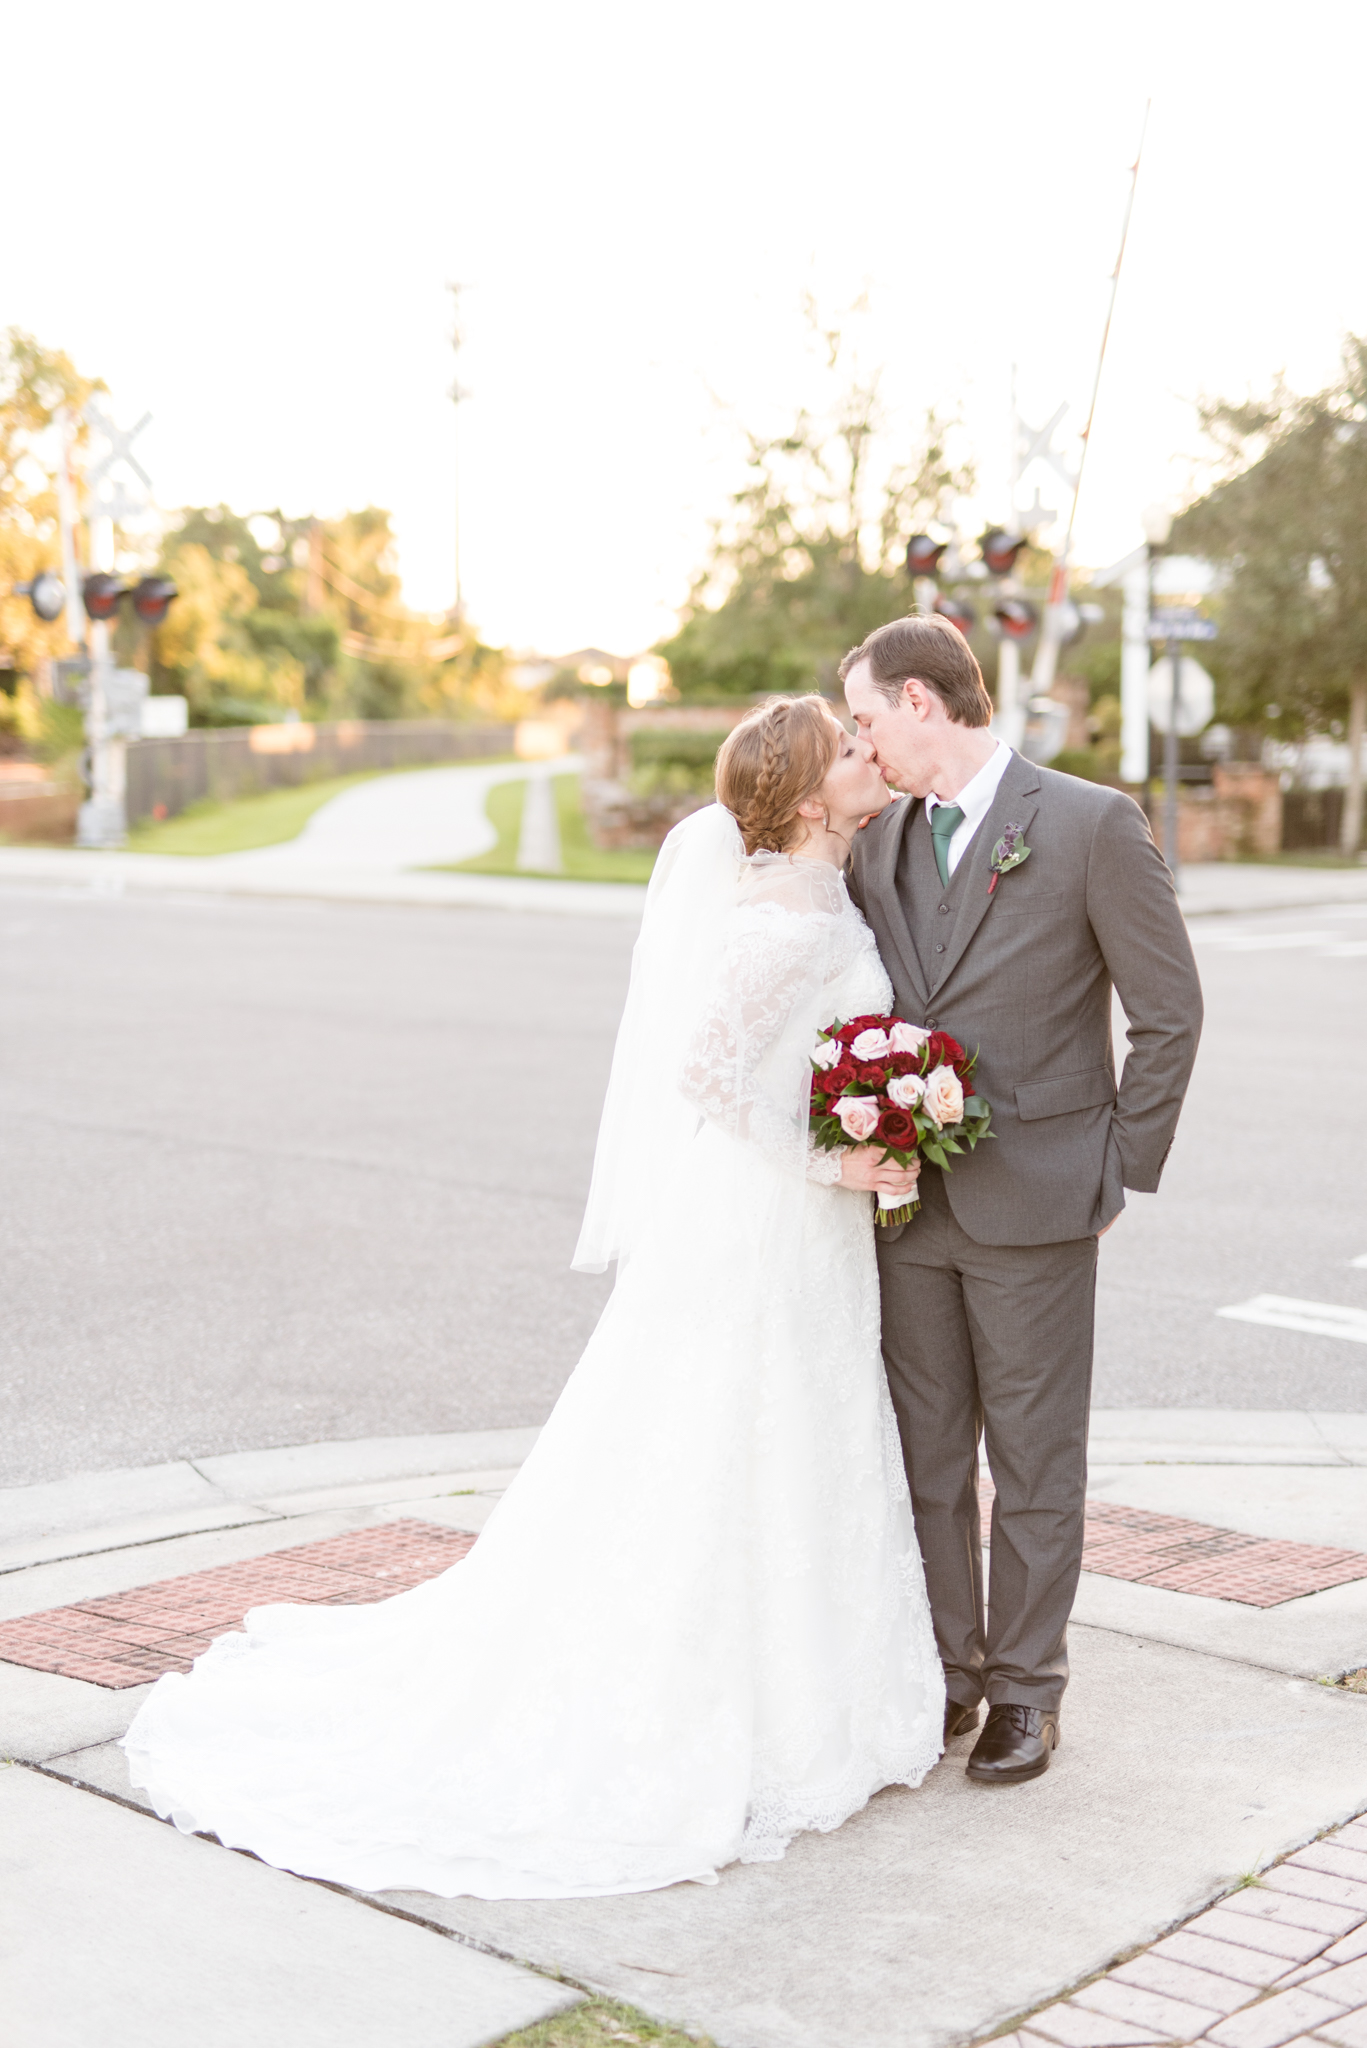 Bride and groom kiss at intersection during sunset.